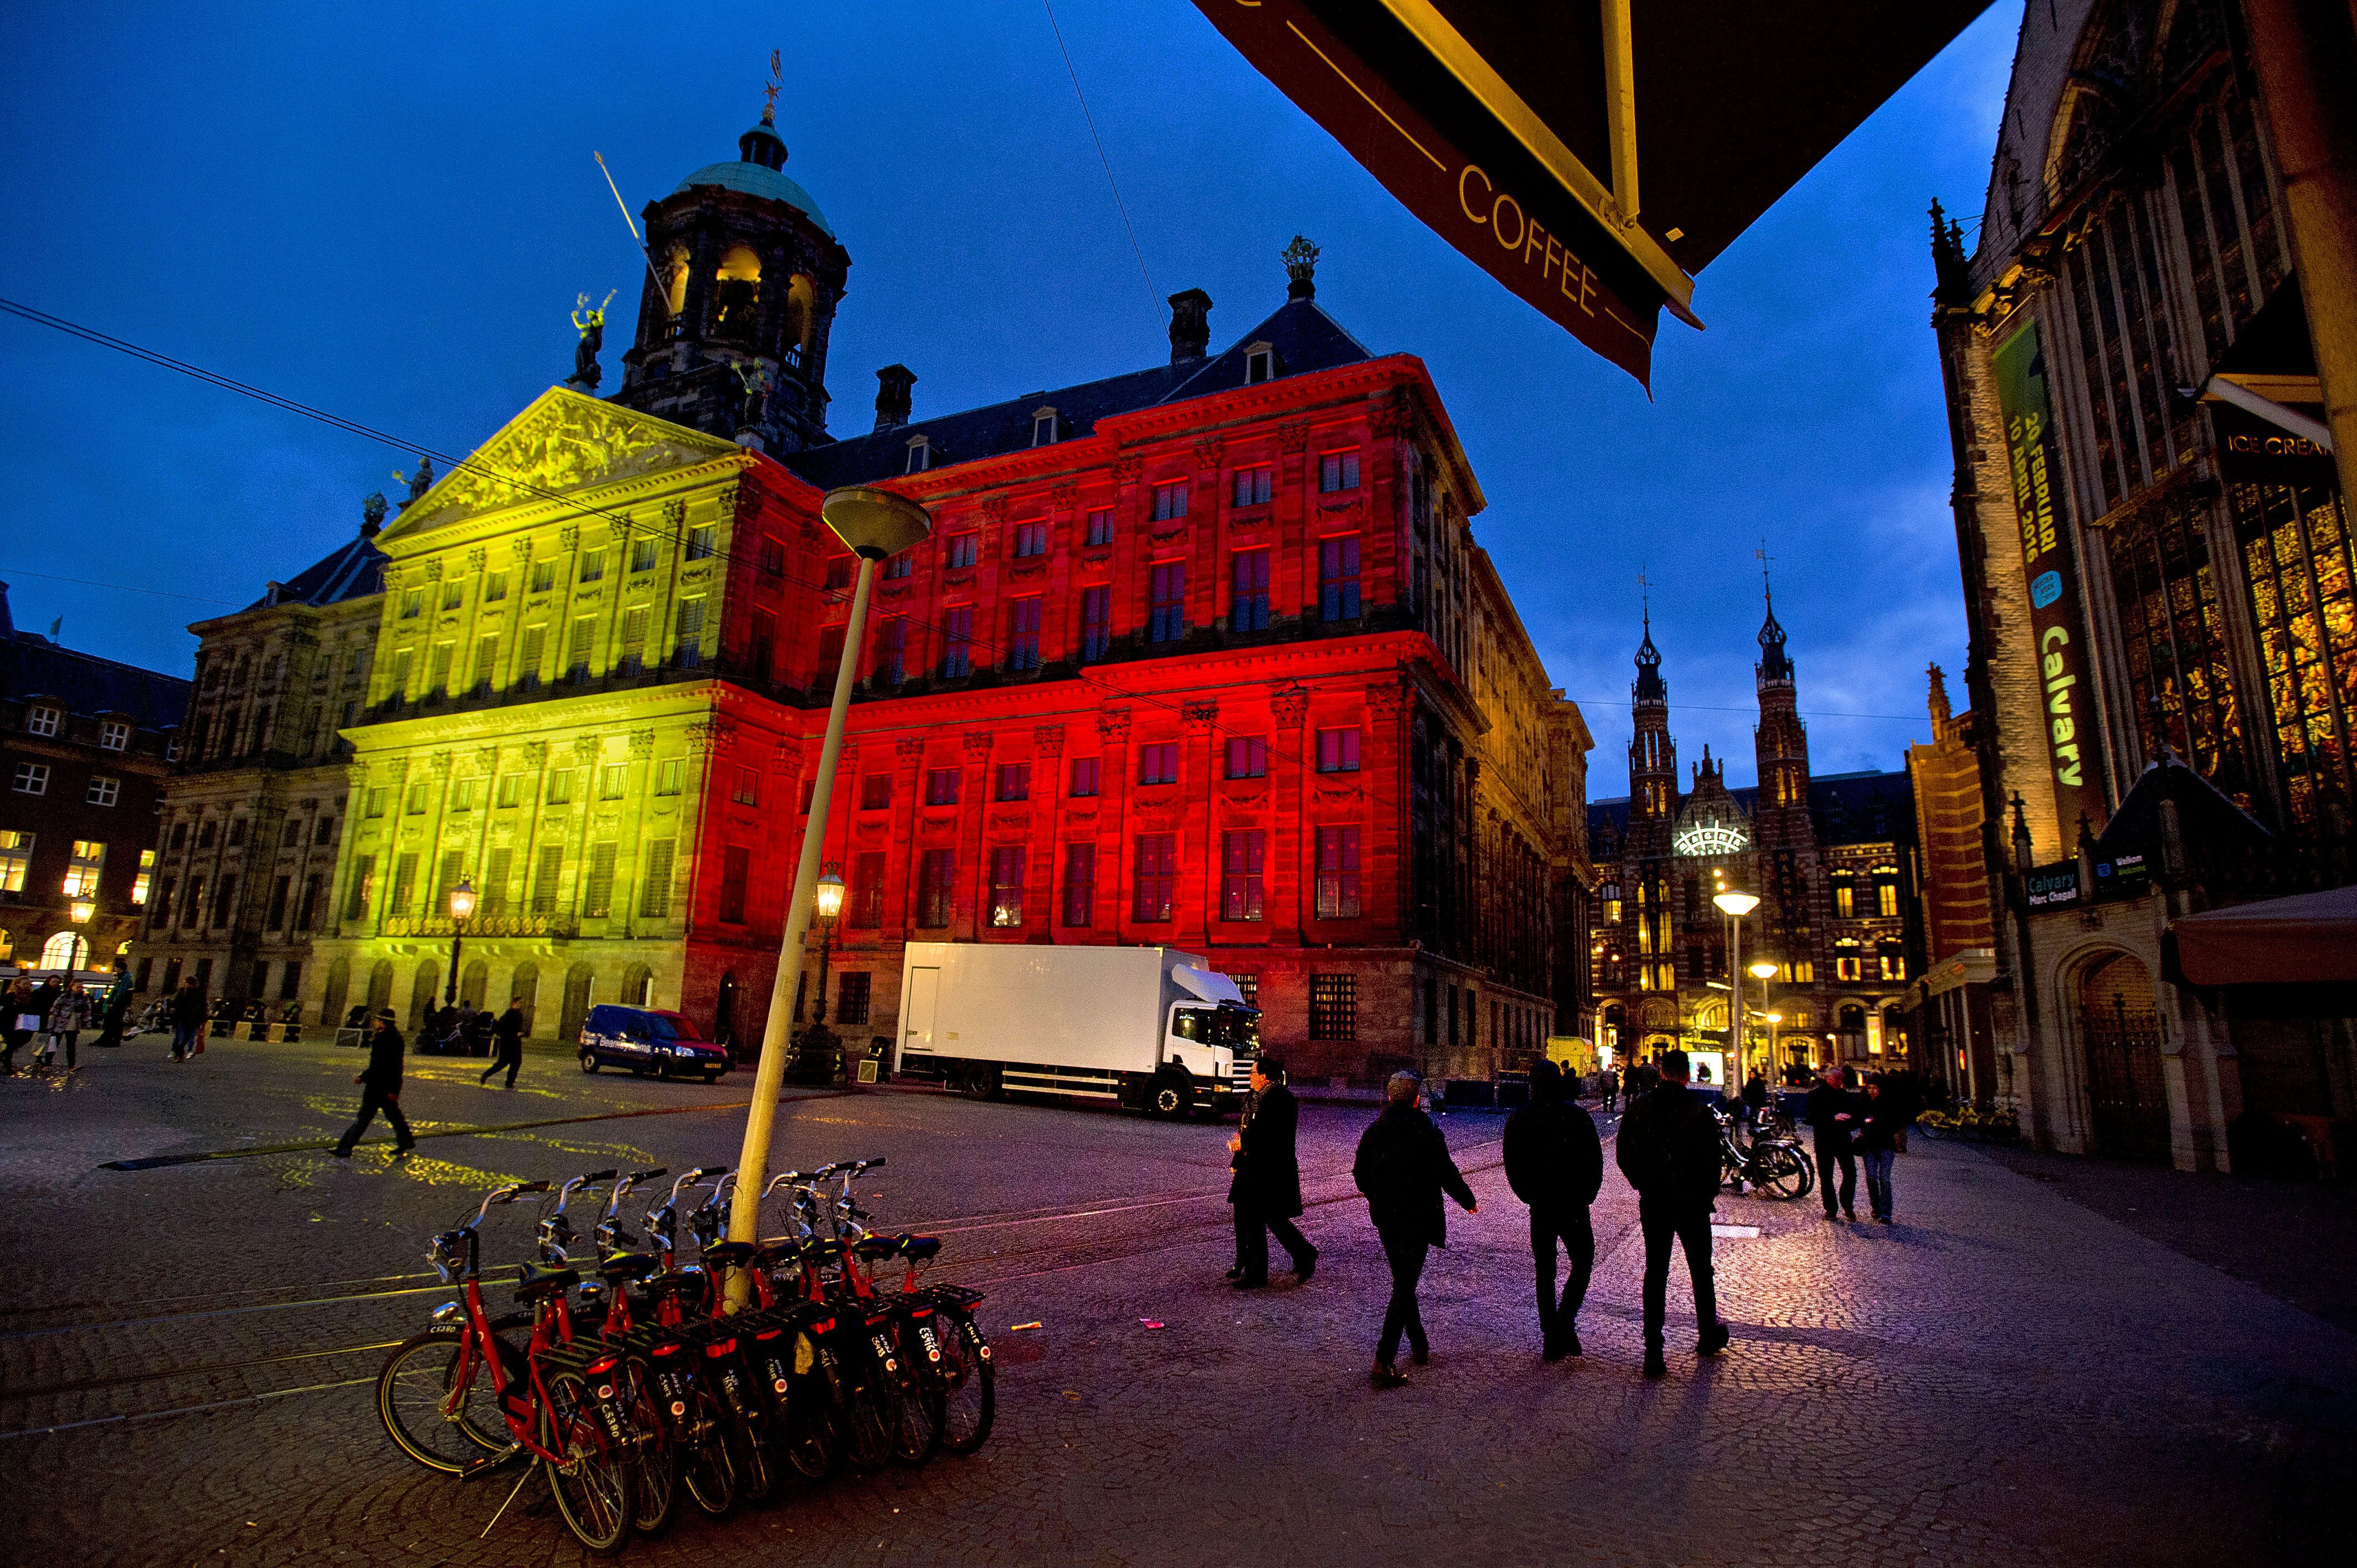 The Royal Palace at Dam Square displays the colors of the Belgian flag in tribute to victims of the Brussels attacks on March 22, 2016 in Amsterdam.